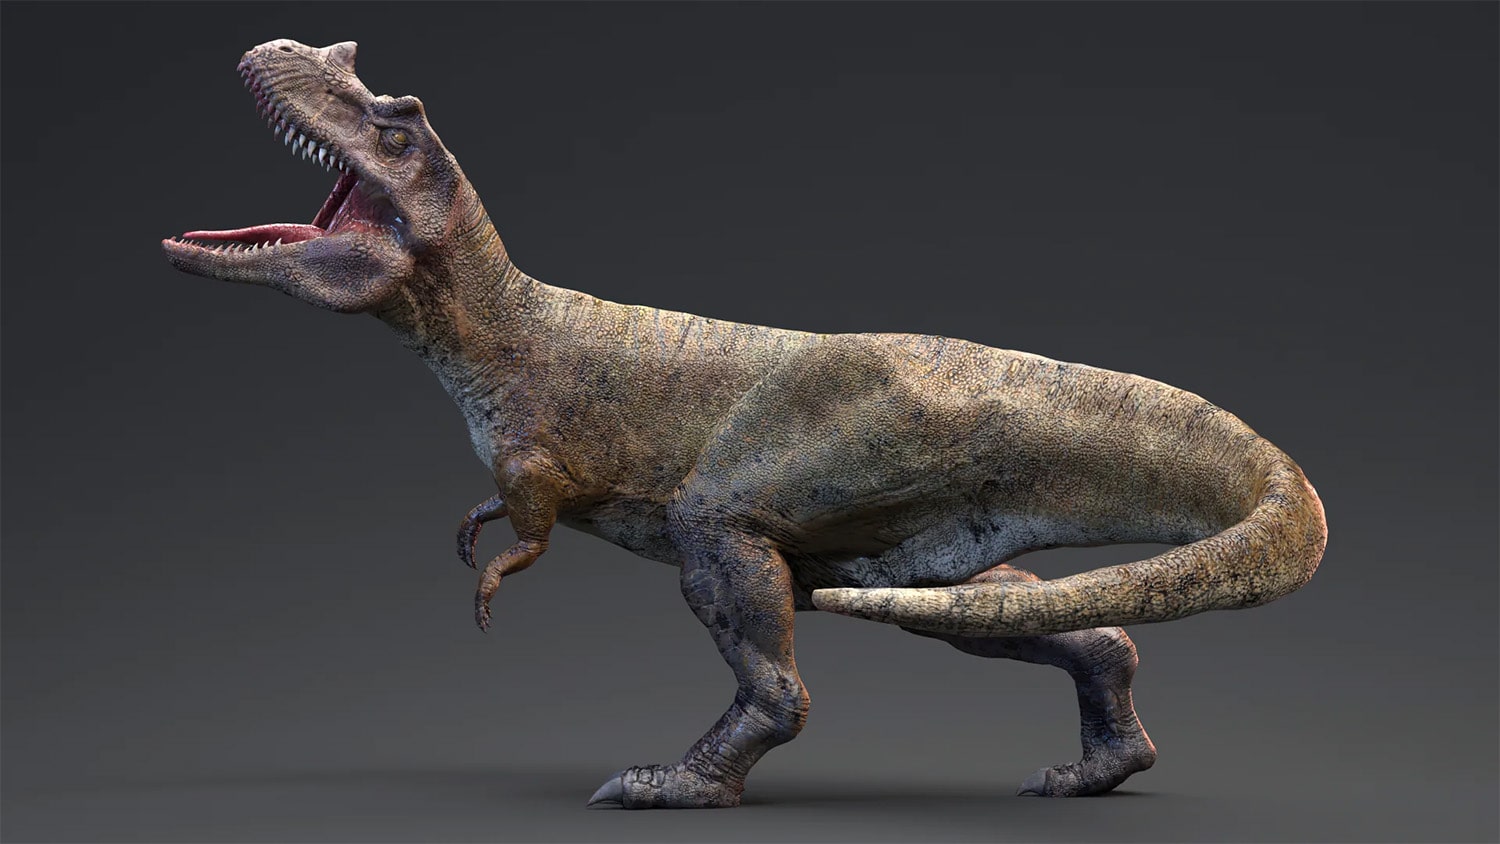 27 interesting facts about Ceratosaurus